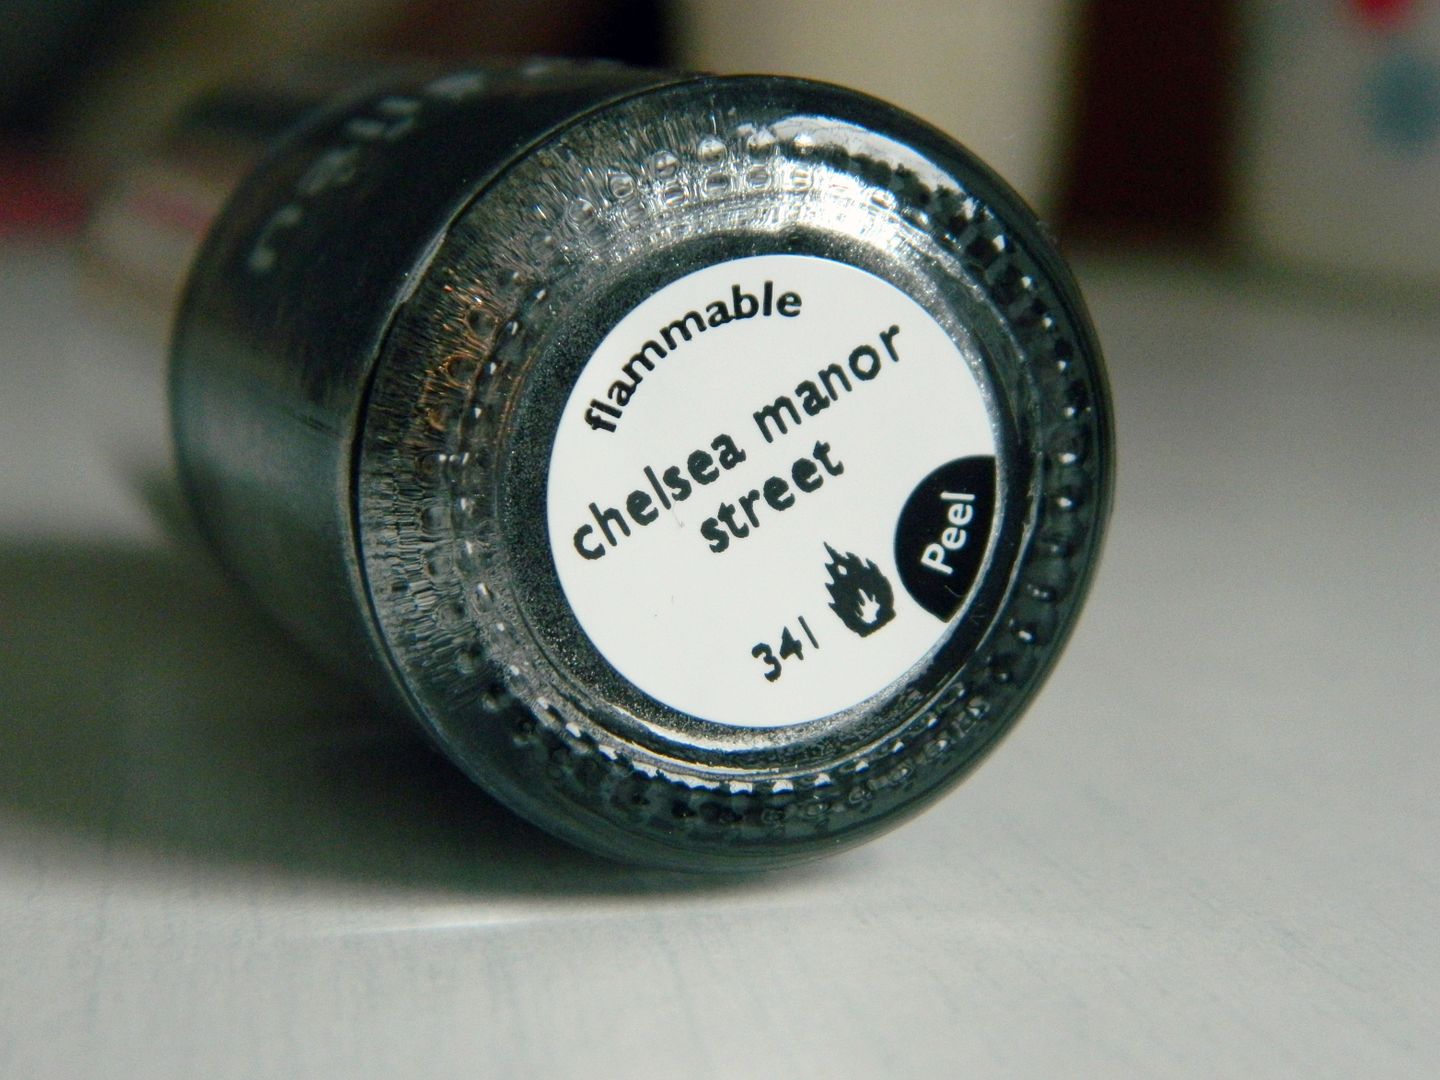 Nails Of The Day Nails Inc Chelsea Manor Street Nail Polish Label Review Belle-amie